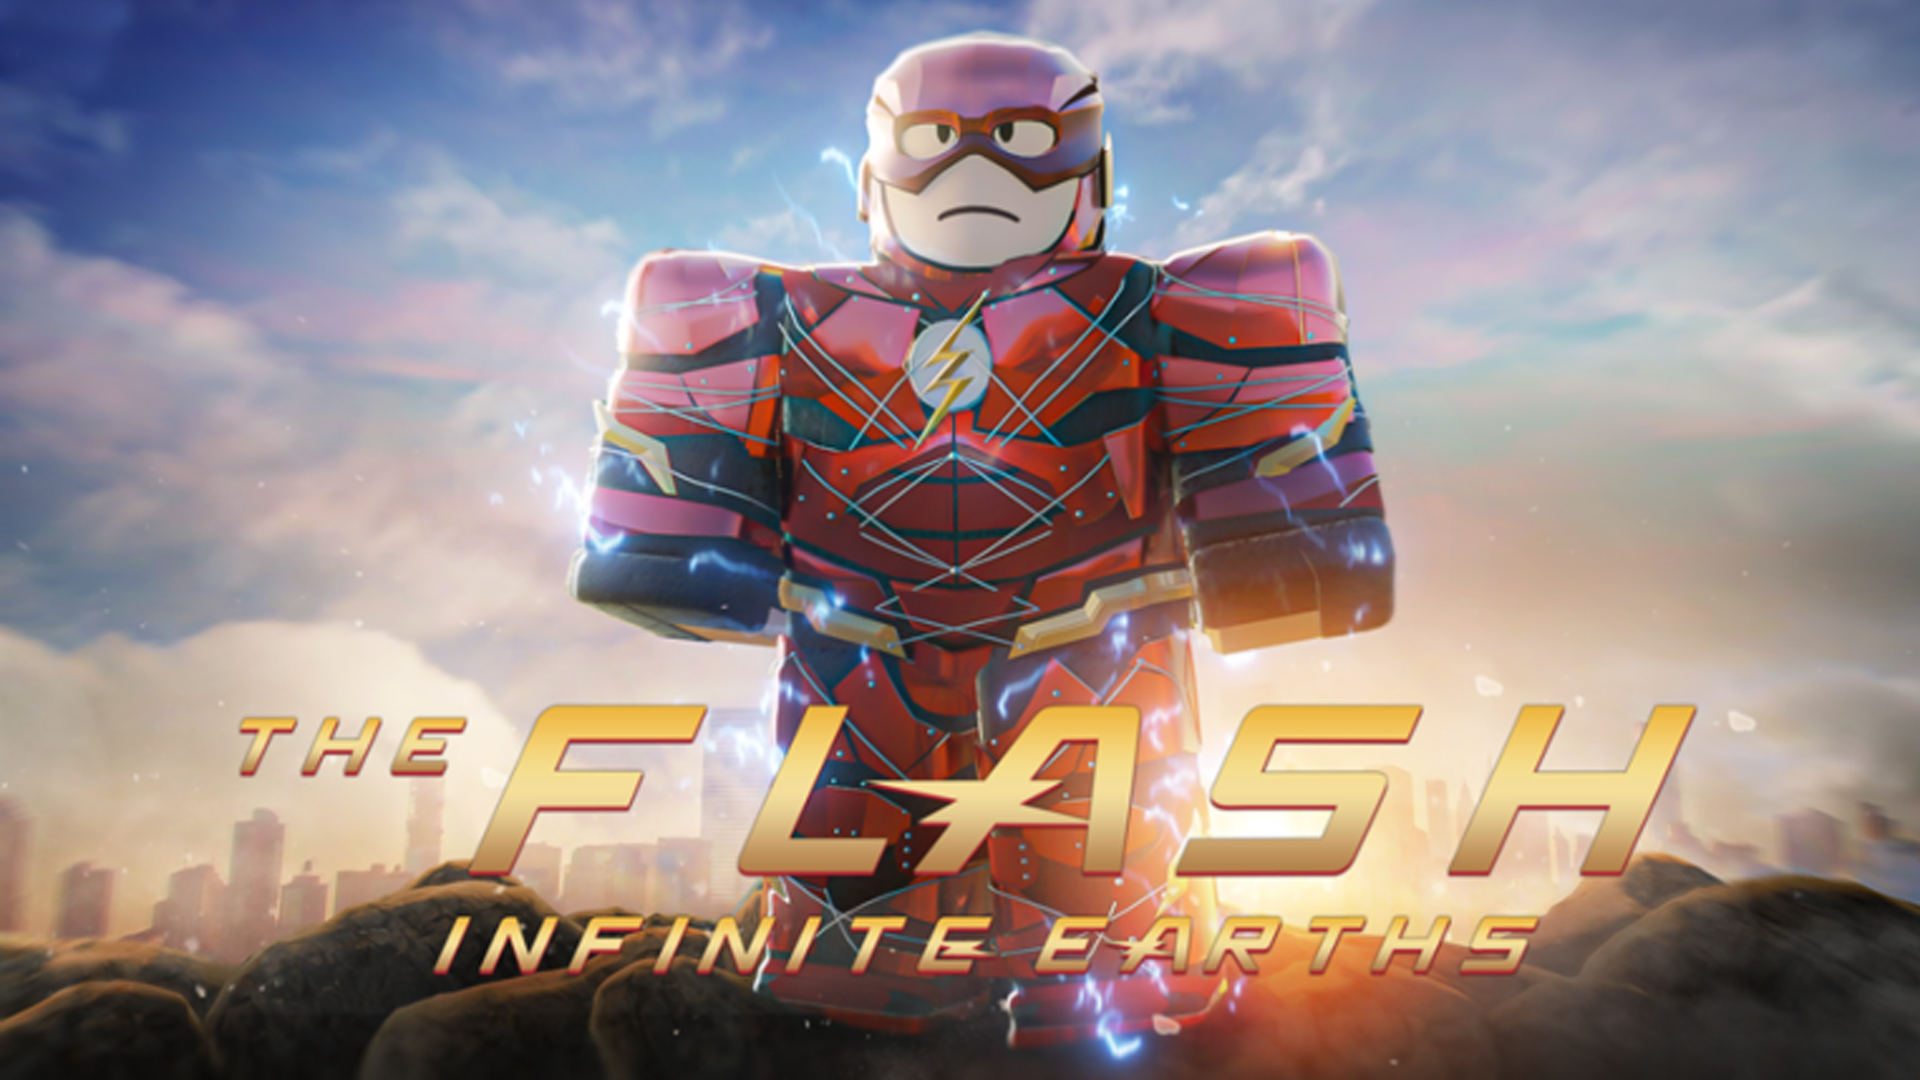 Roblox The Flash: Earth Prime Codes (December 2023) - Touch, Tap, Play